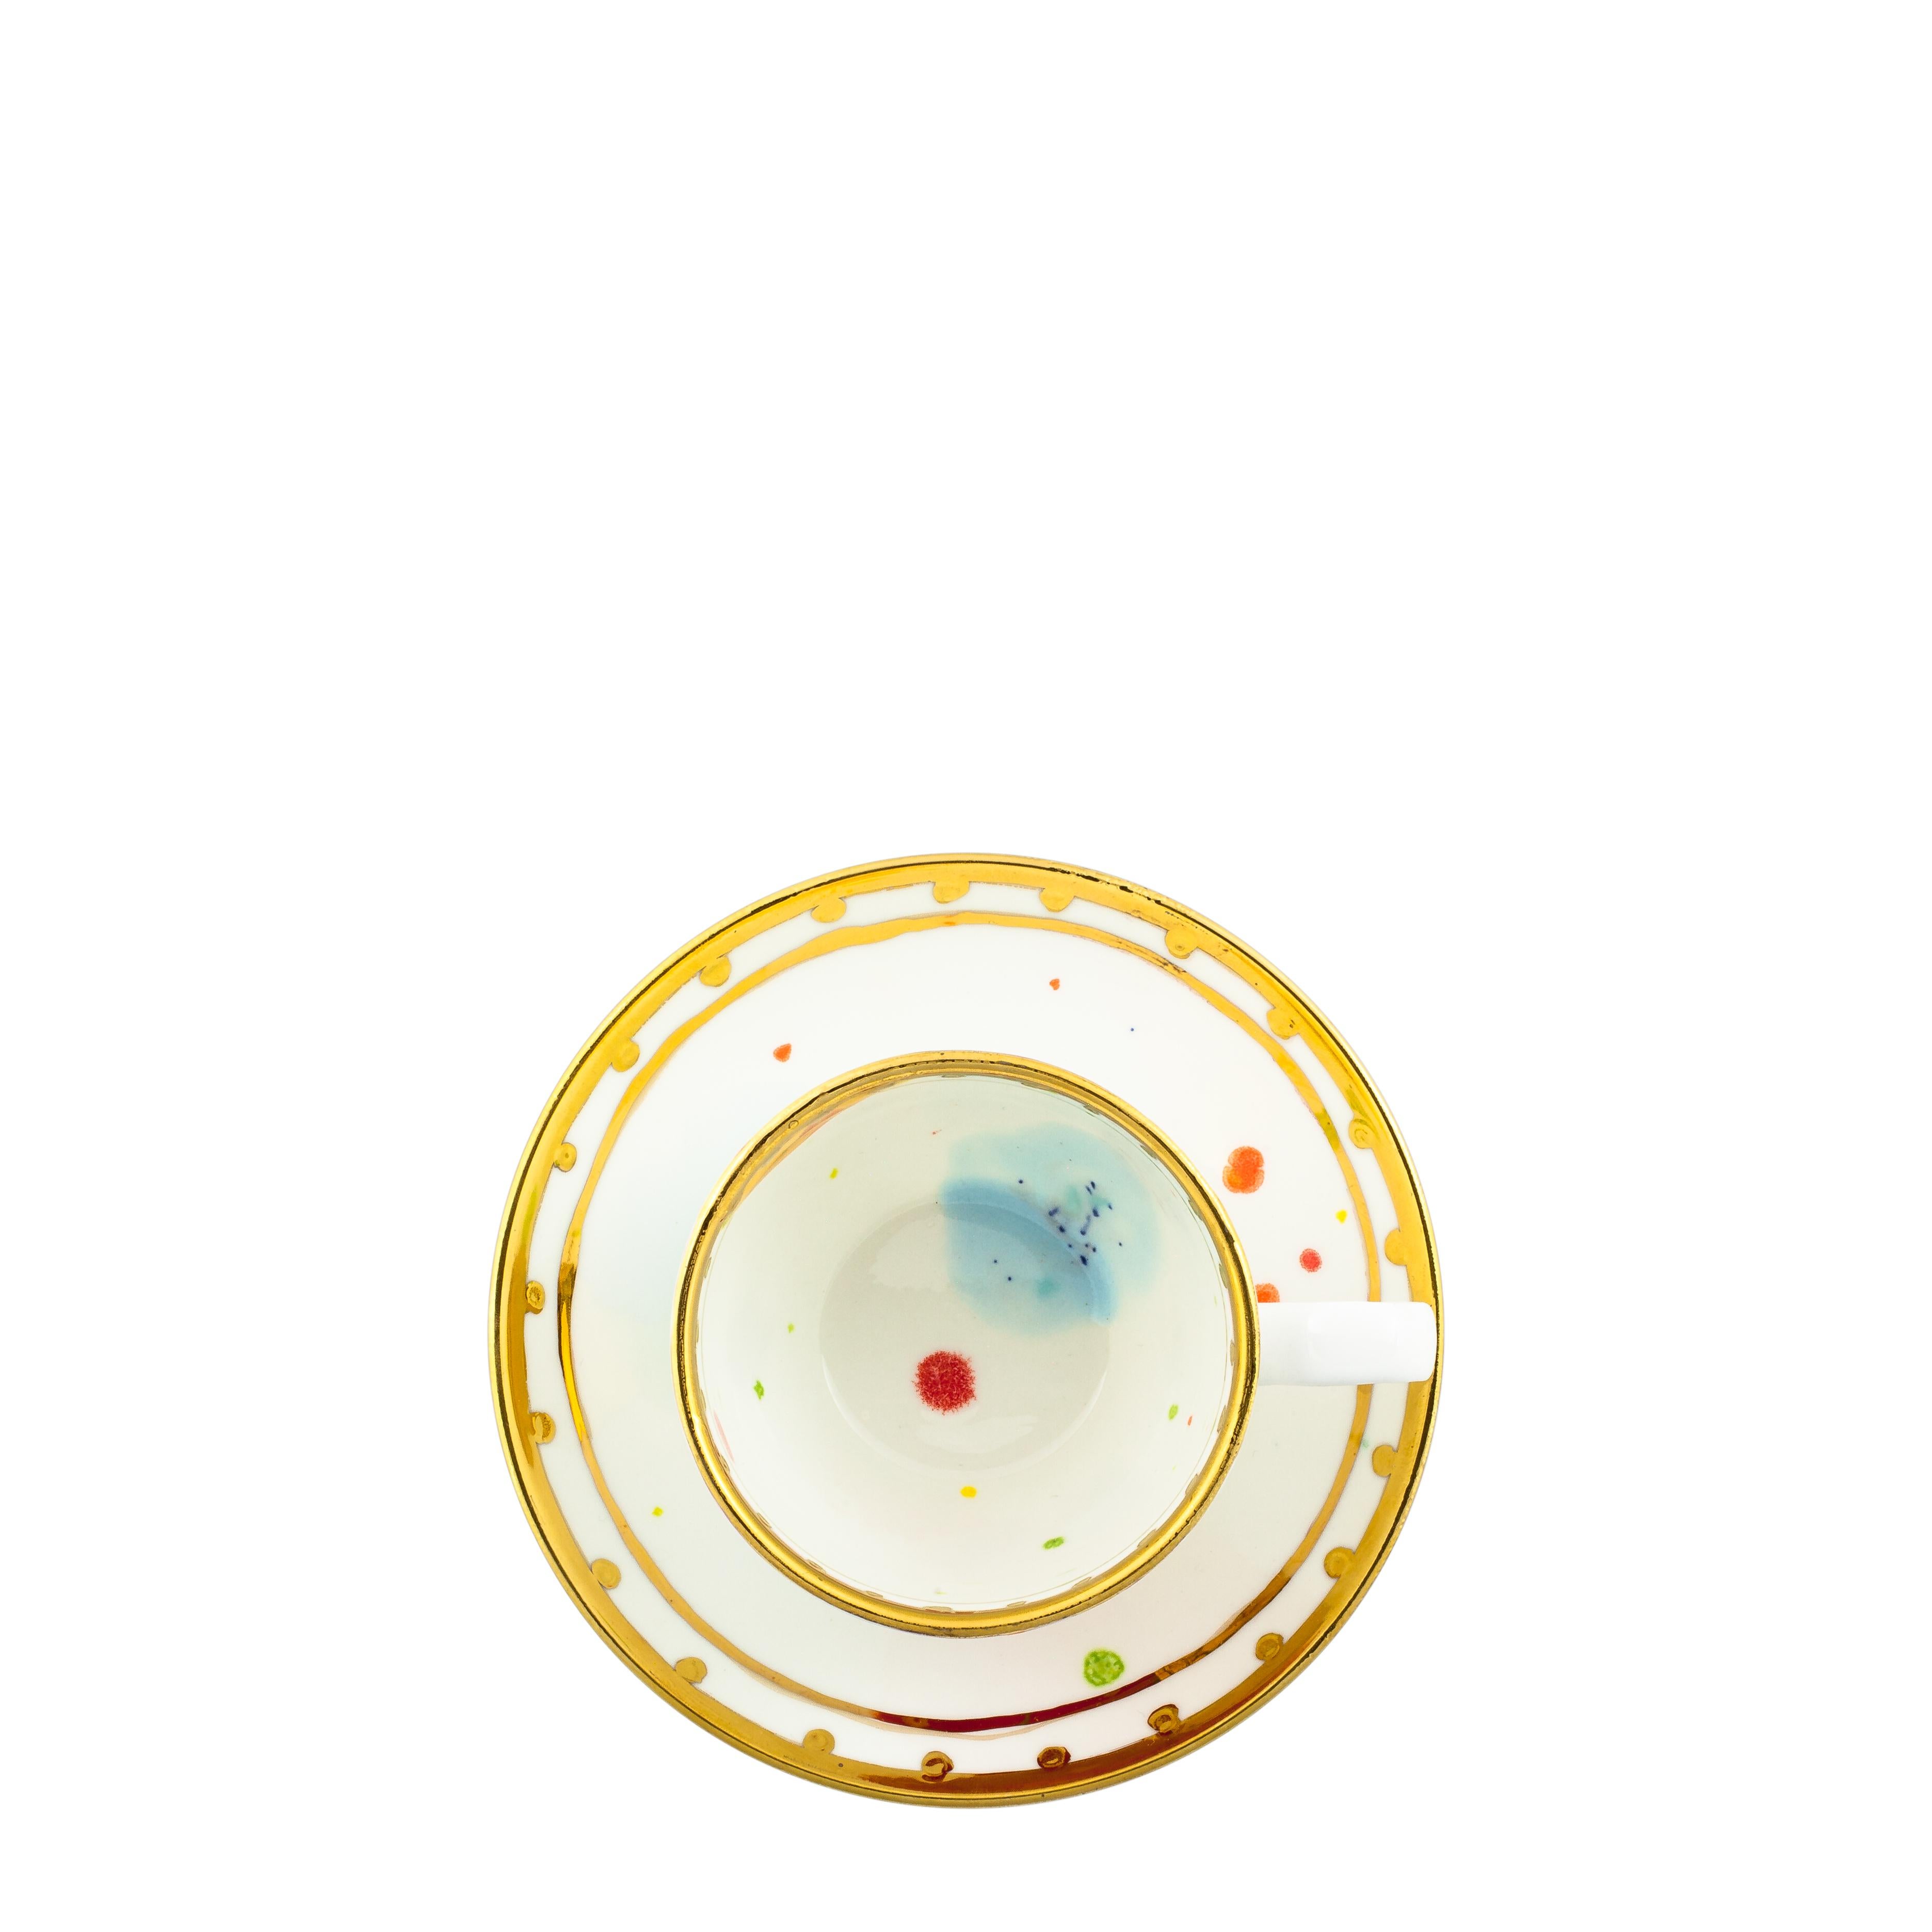 Handcrafted in Italy from the finest porcelain, this Caravaggio coffee cup and saucer is painted both inside and outside with red, yellow and light-blue splotches on a white enamel; an elegant golden rim turns inside like a medieval tower